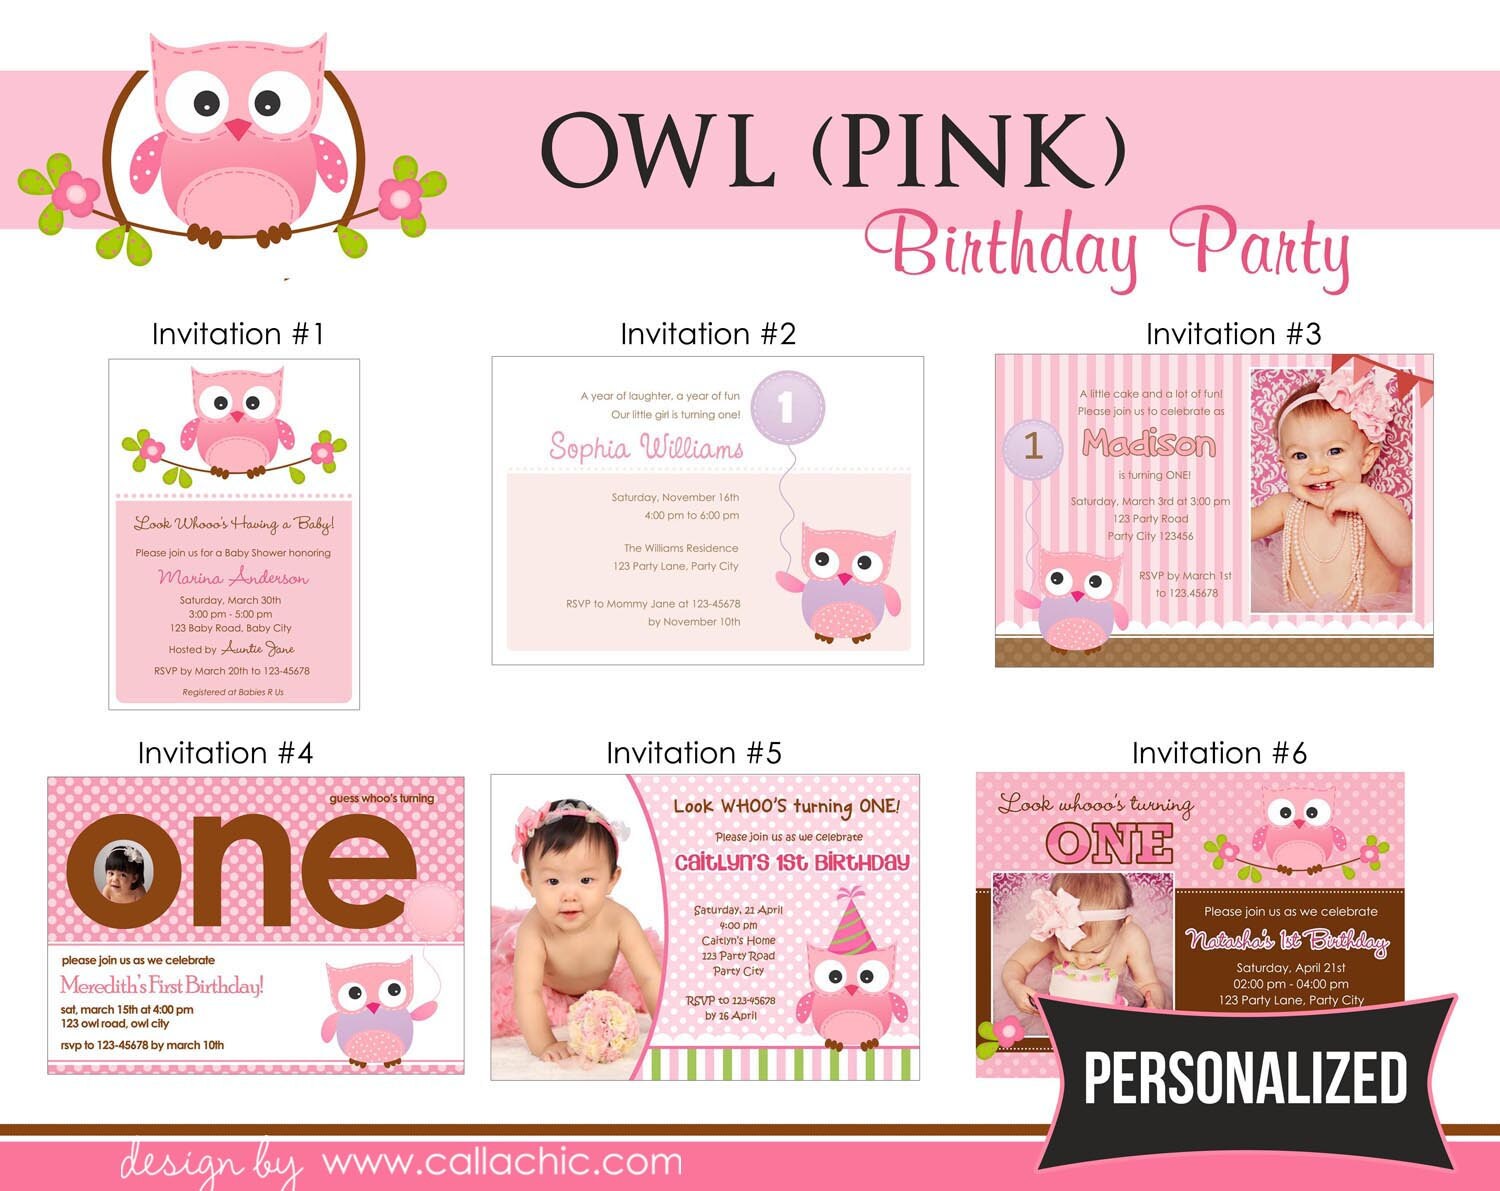 Baby's First Birthday Party Package in Pink - PDF – Simple Made Pretty